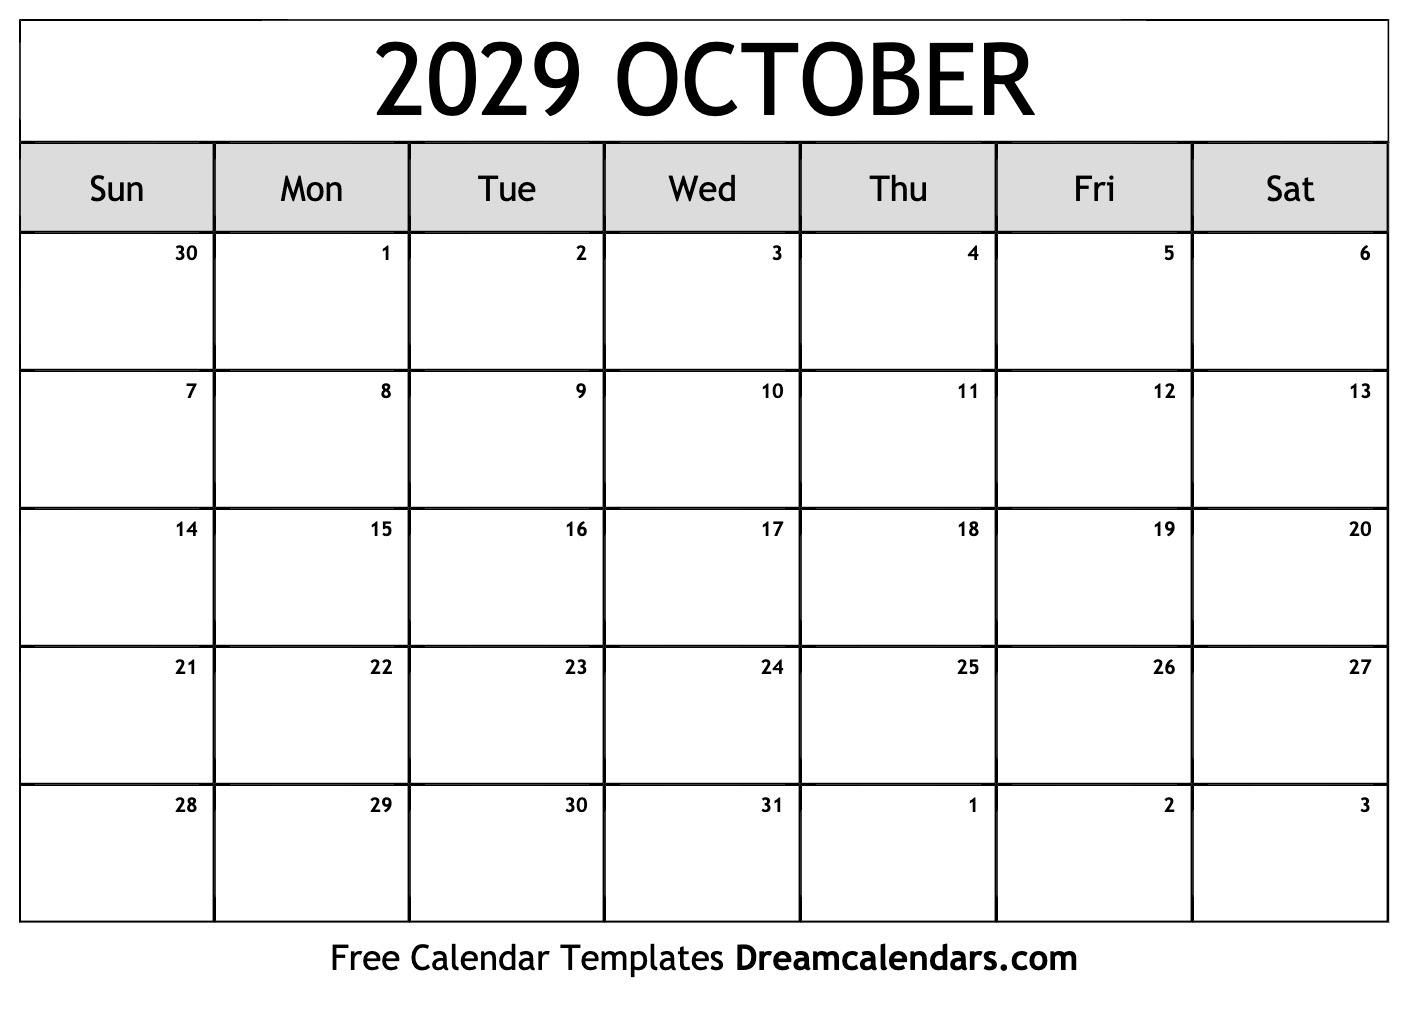 october-2029-calendar-free-blank-printable-with-holidays